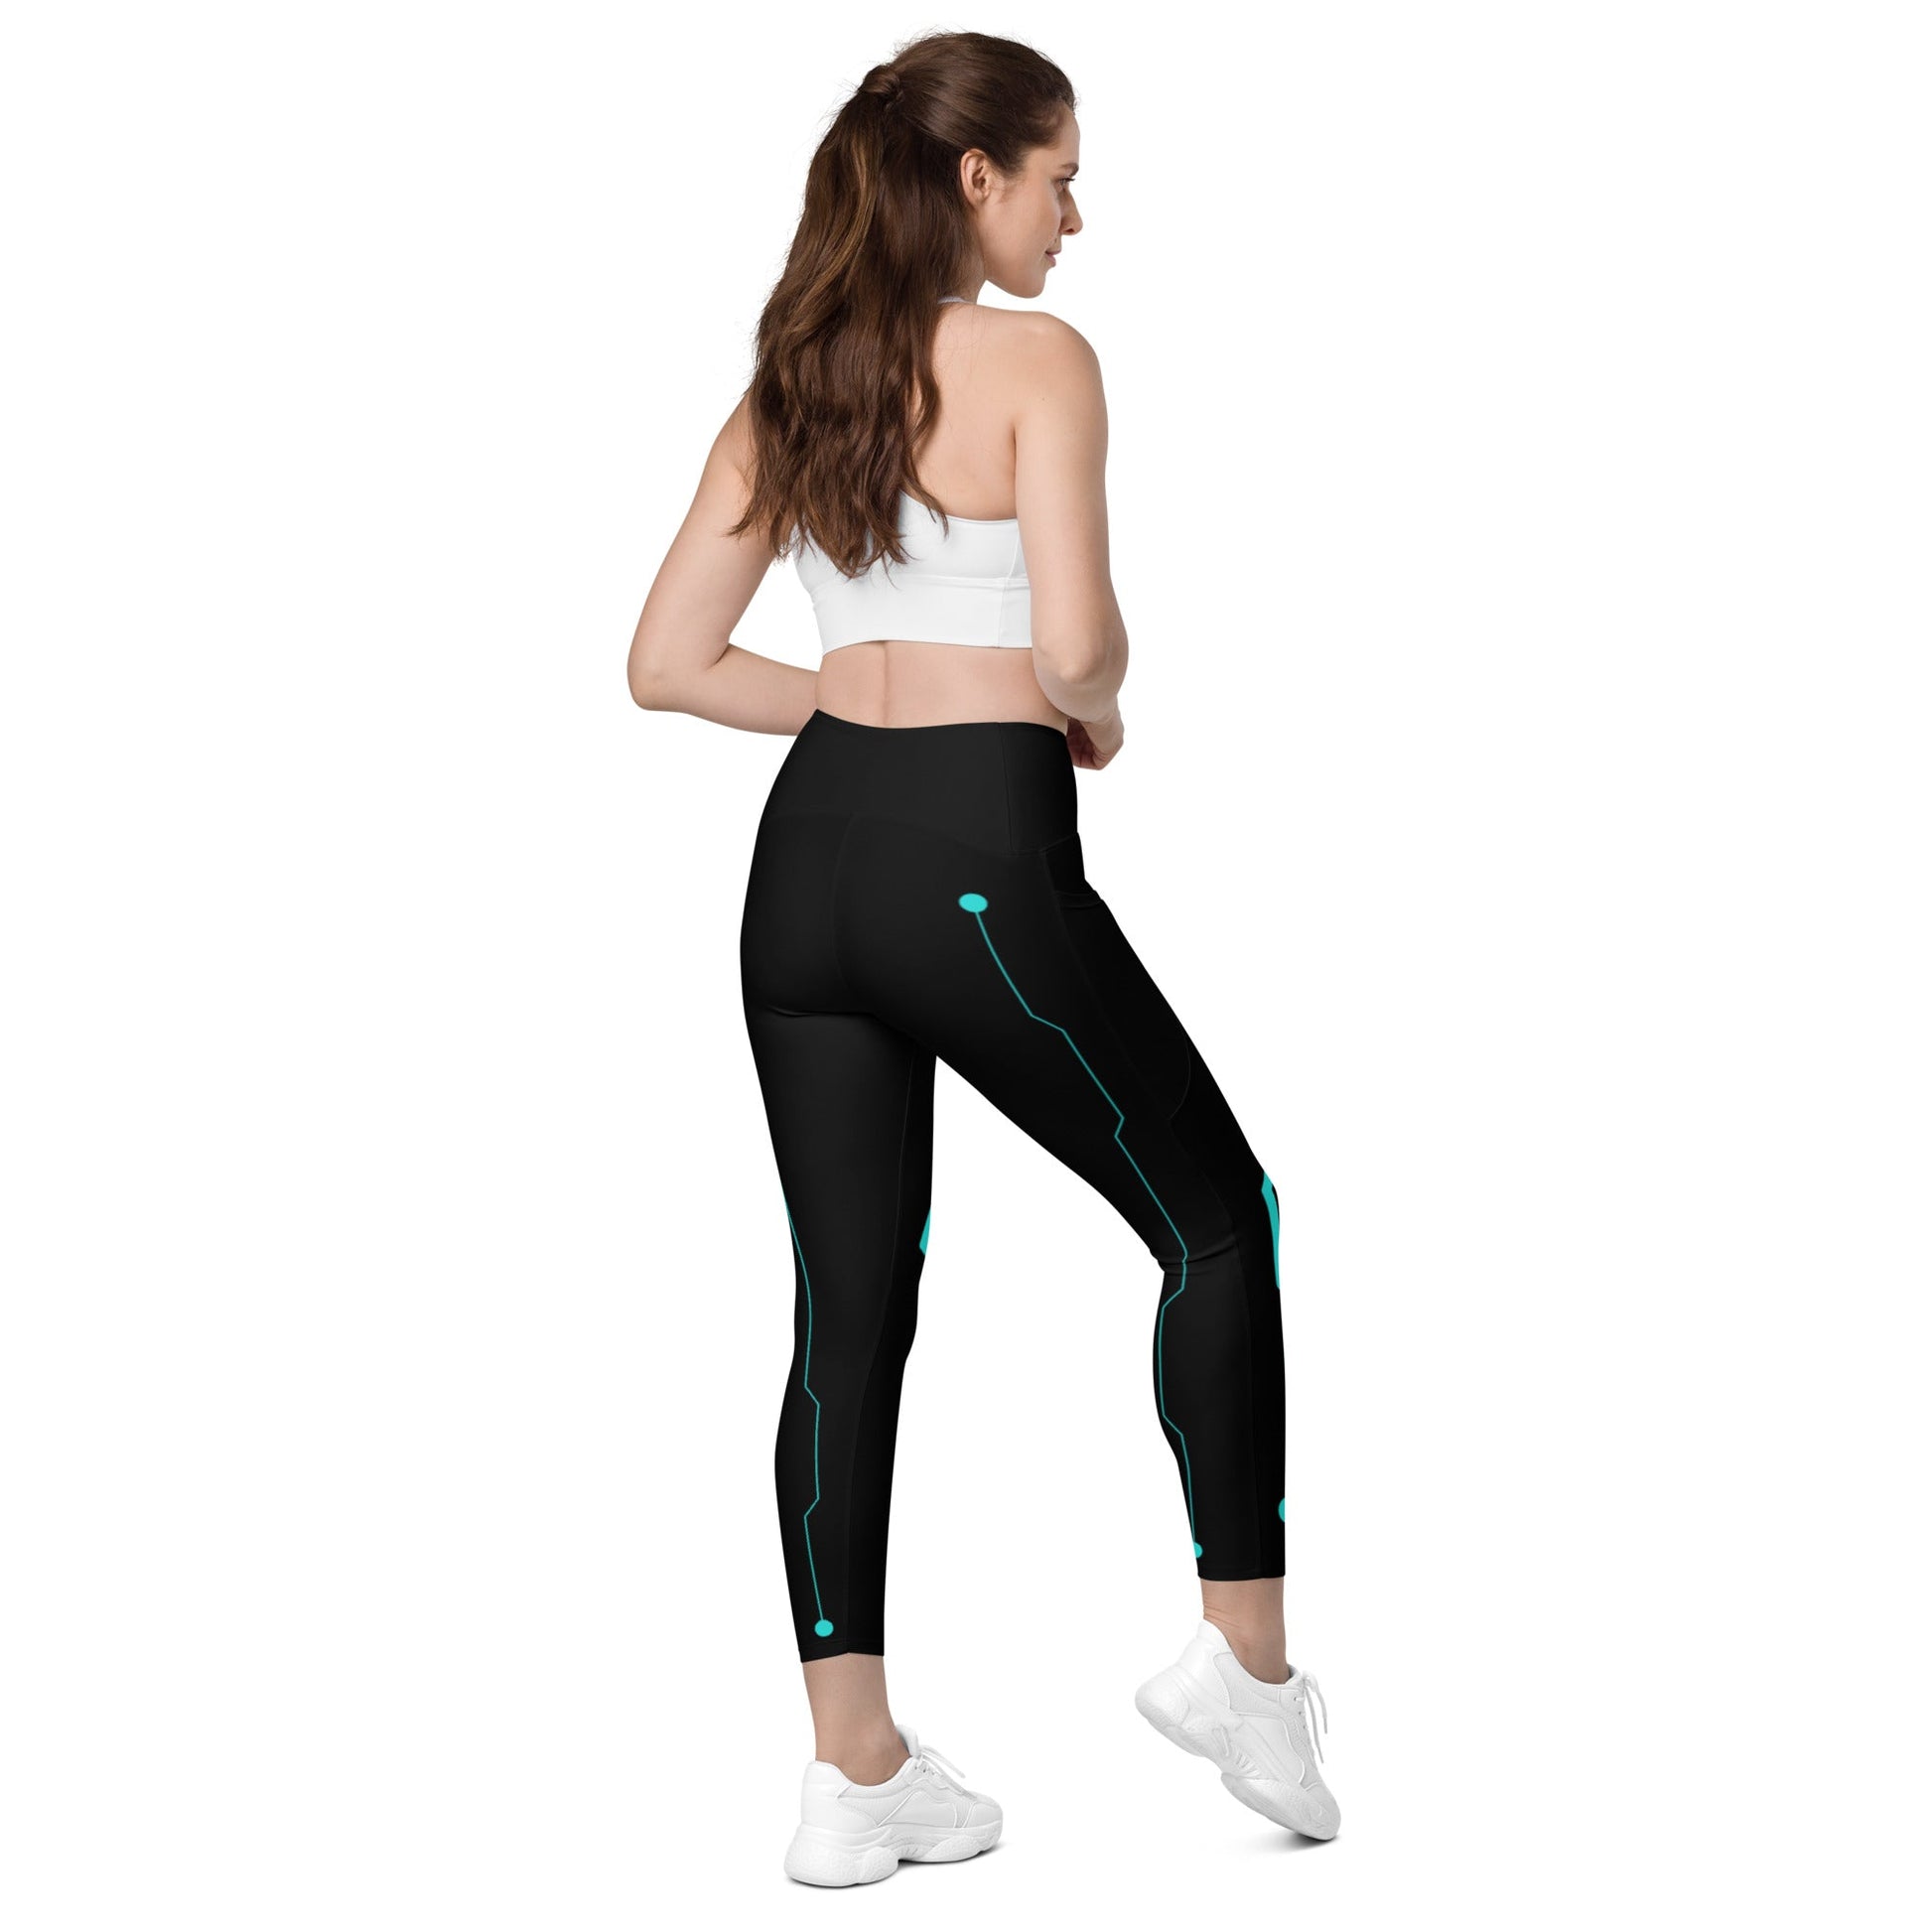 The User Crossover leggings with pockets